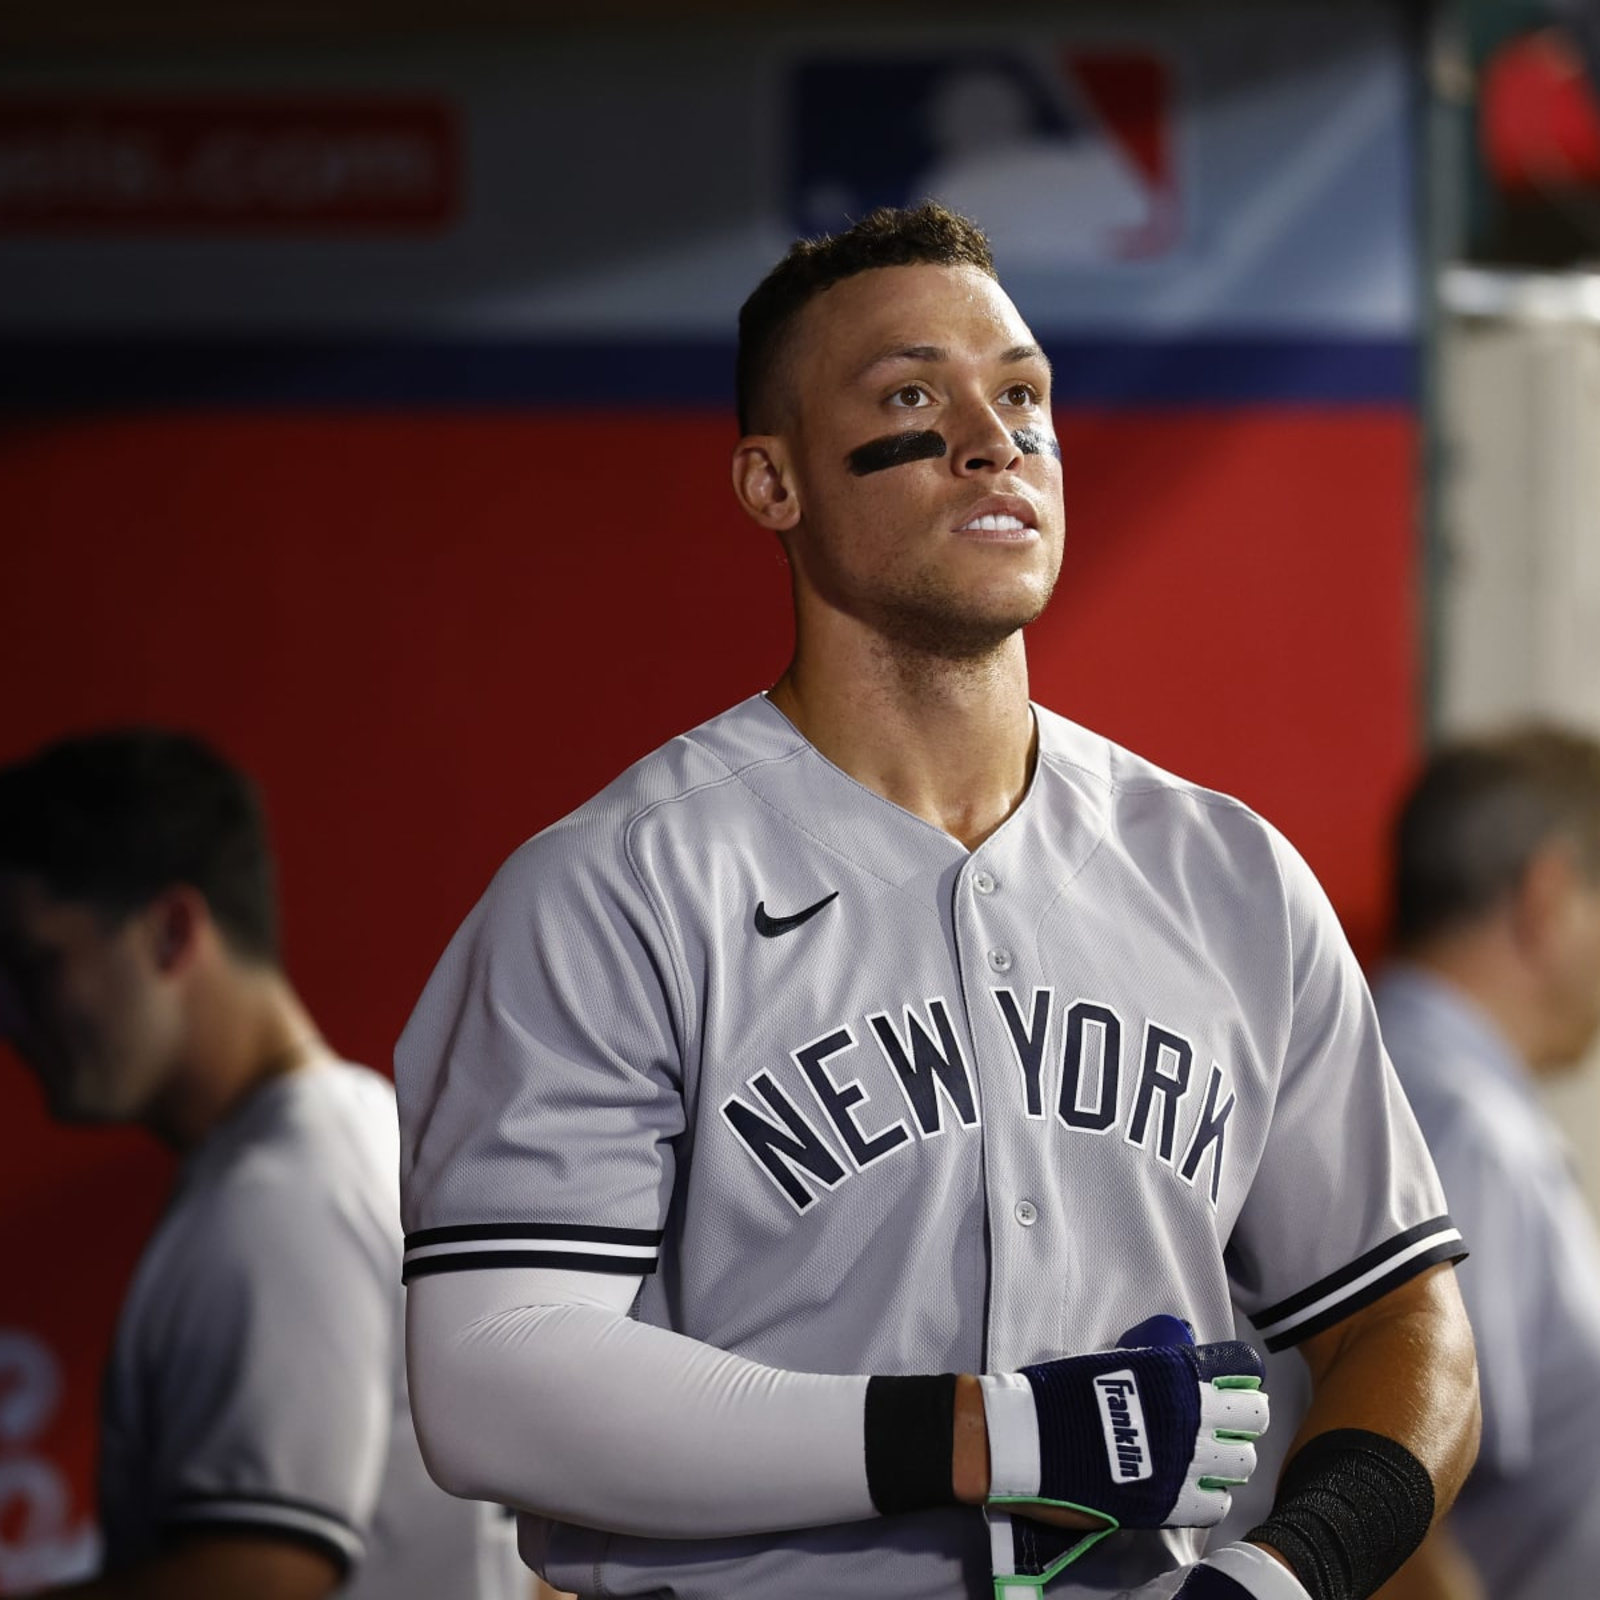 Yankees have better chance to keep Aaron Judge than Mets with